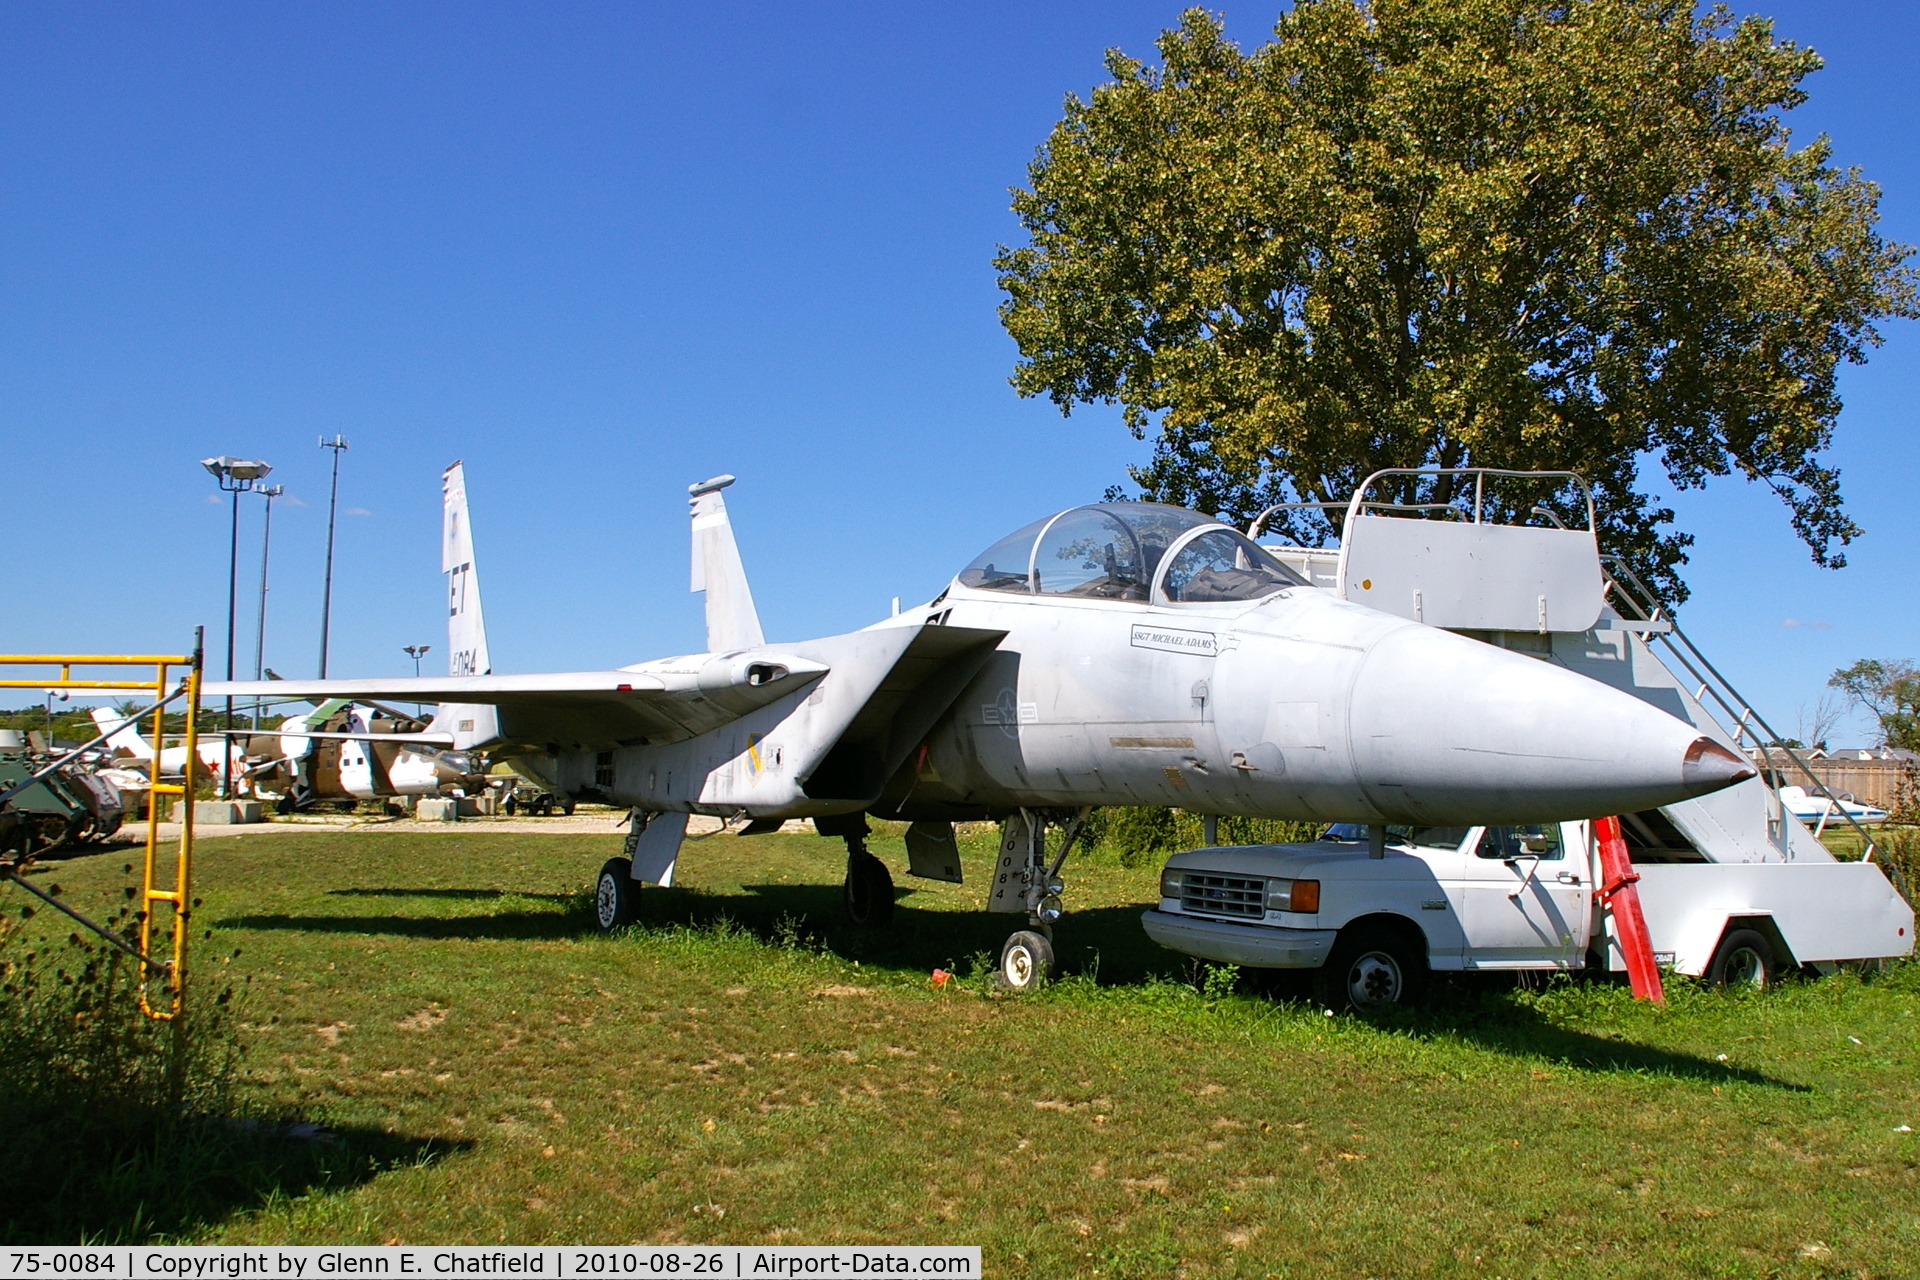 75-0084, 1975 McDonnell Douglas F-15B Eagle C/N 0143/B020, Russell Military Museum